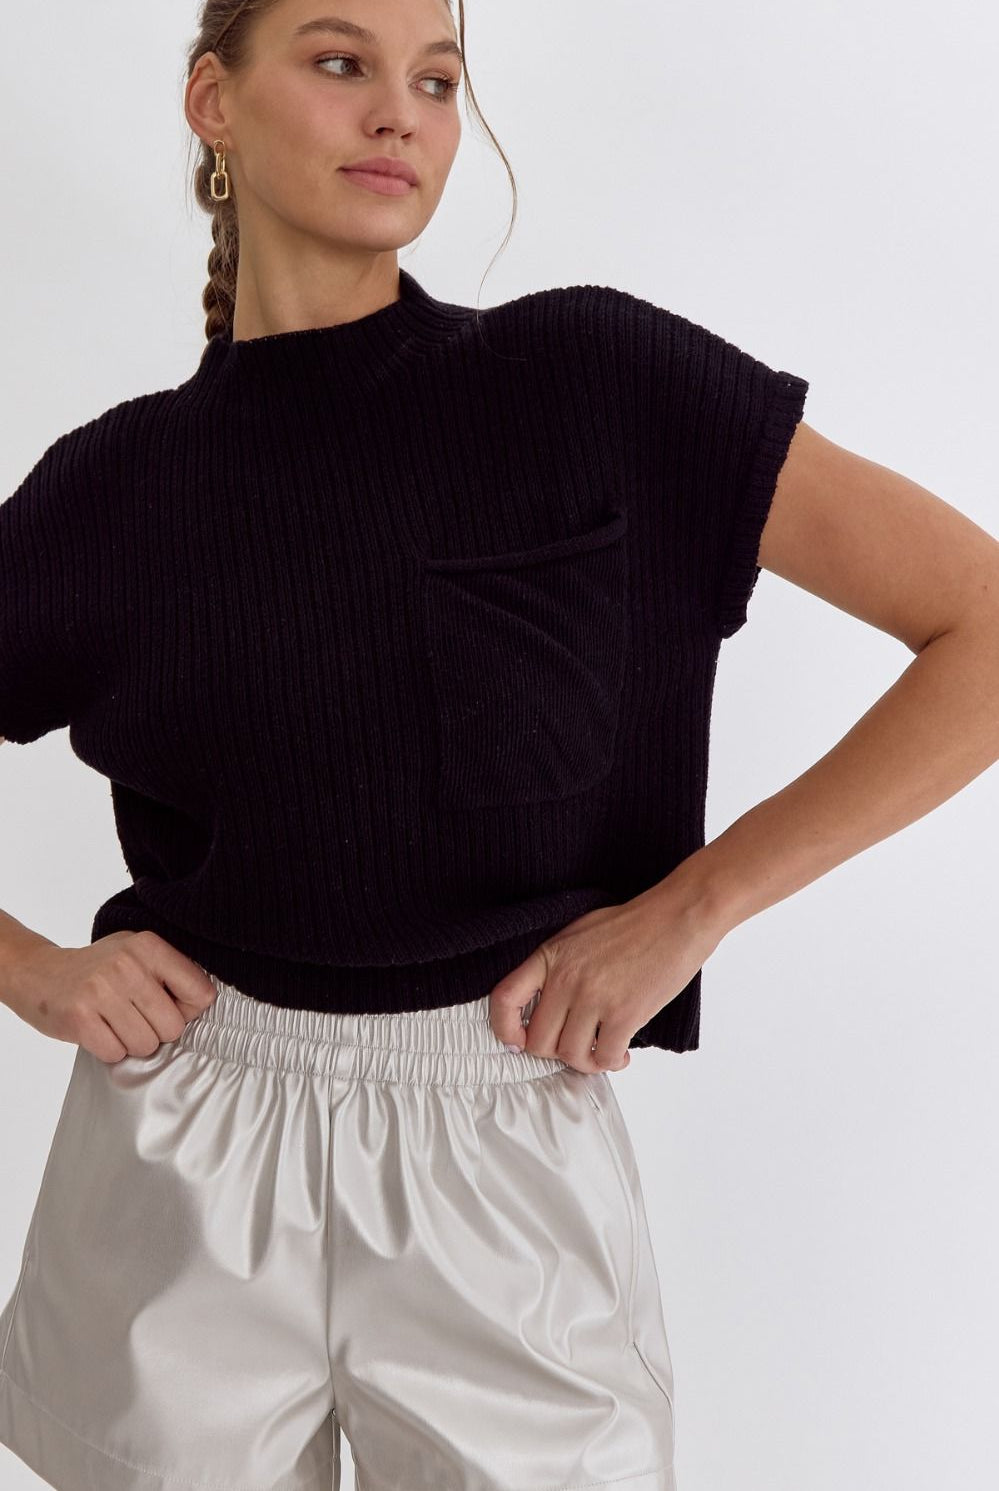 Abigail Knit Mock Neck Crop Top with Pocket - Be You Boutique